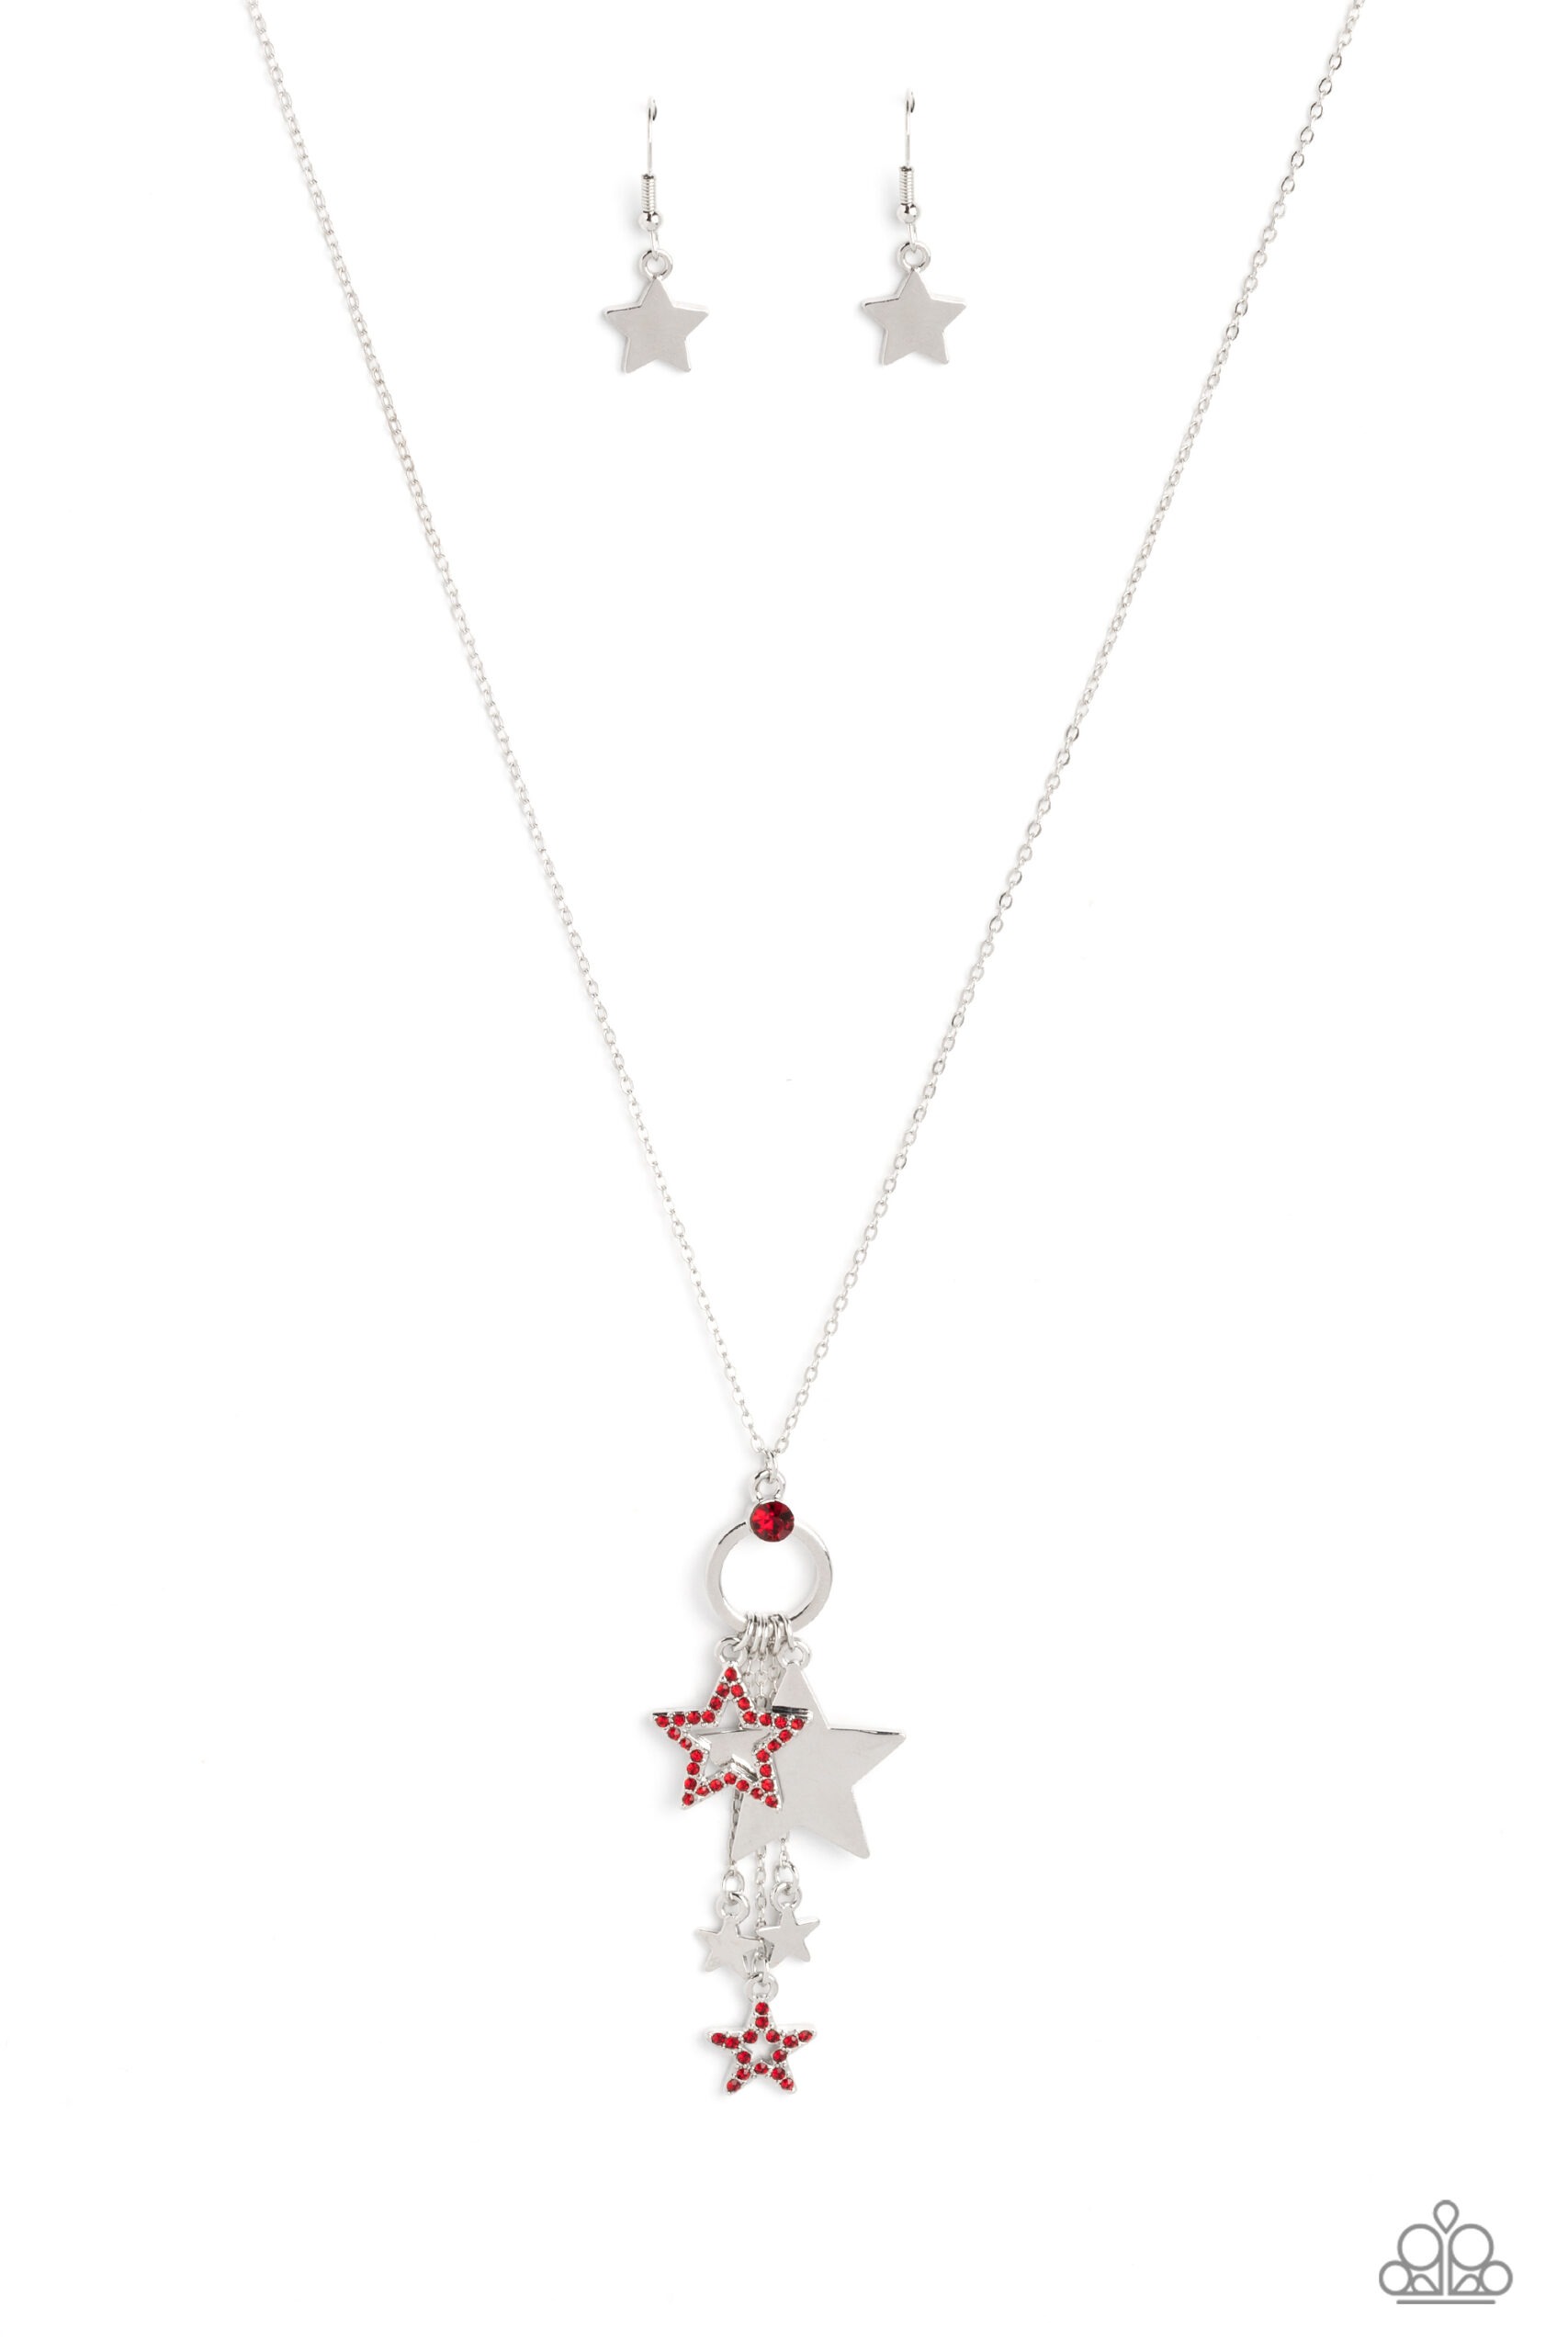 Necklace - Starry Statutes - Red